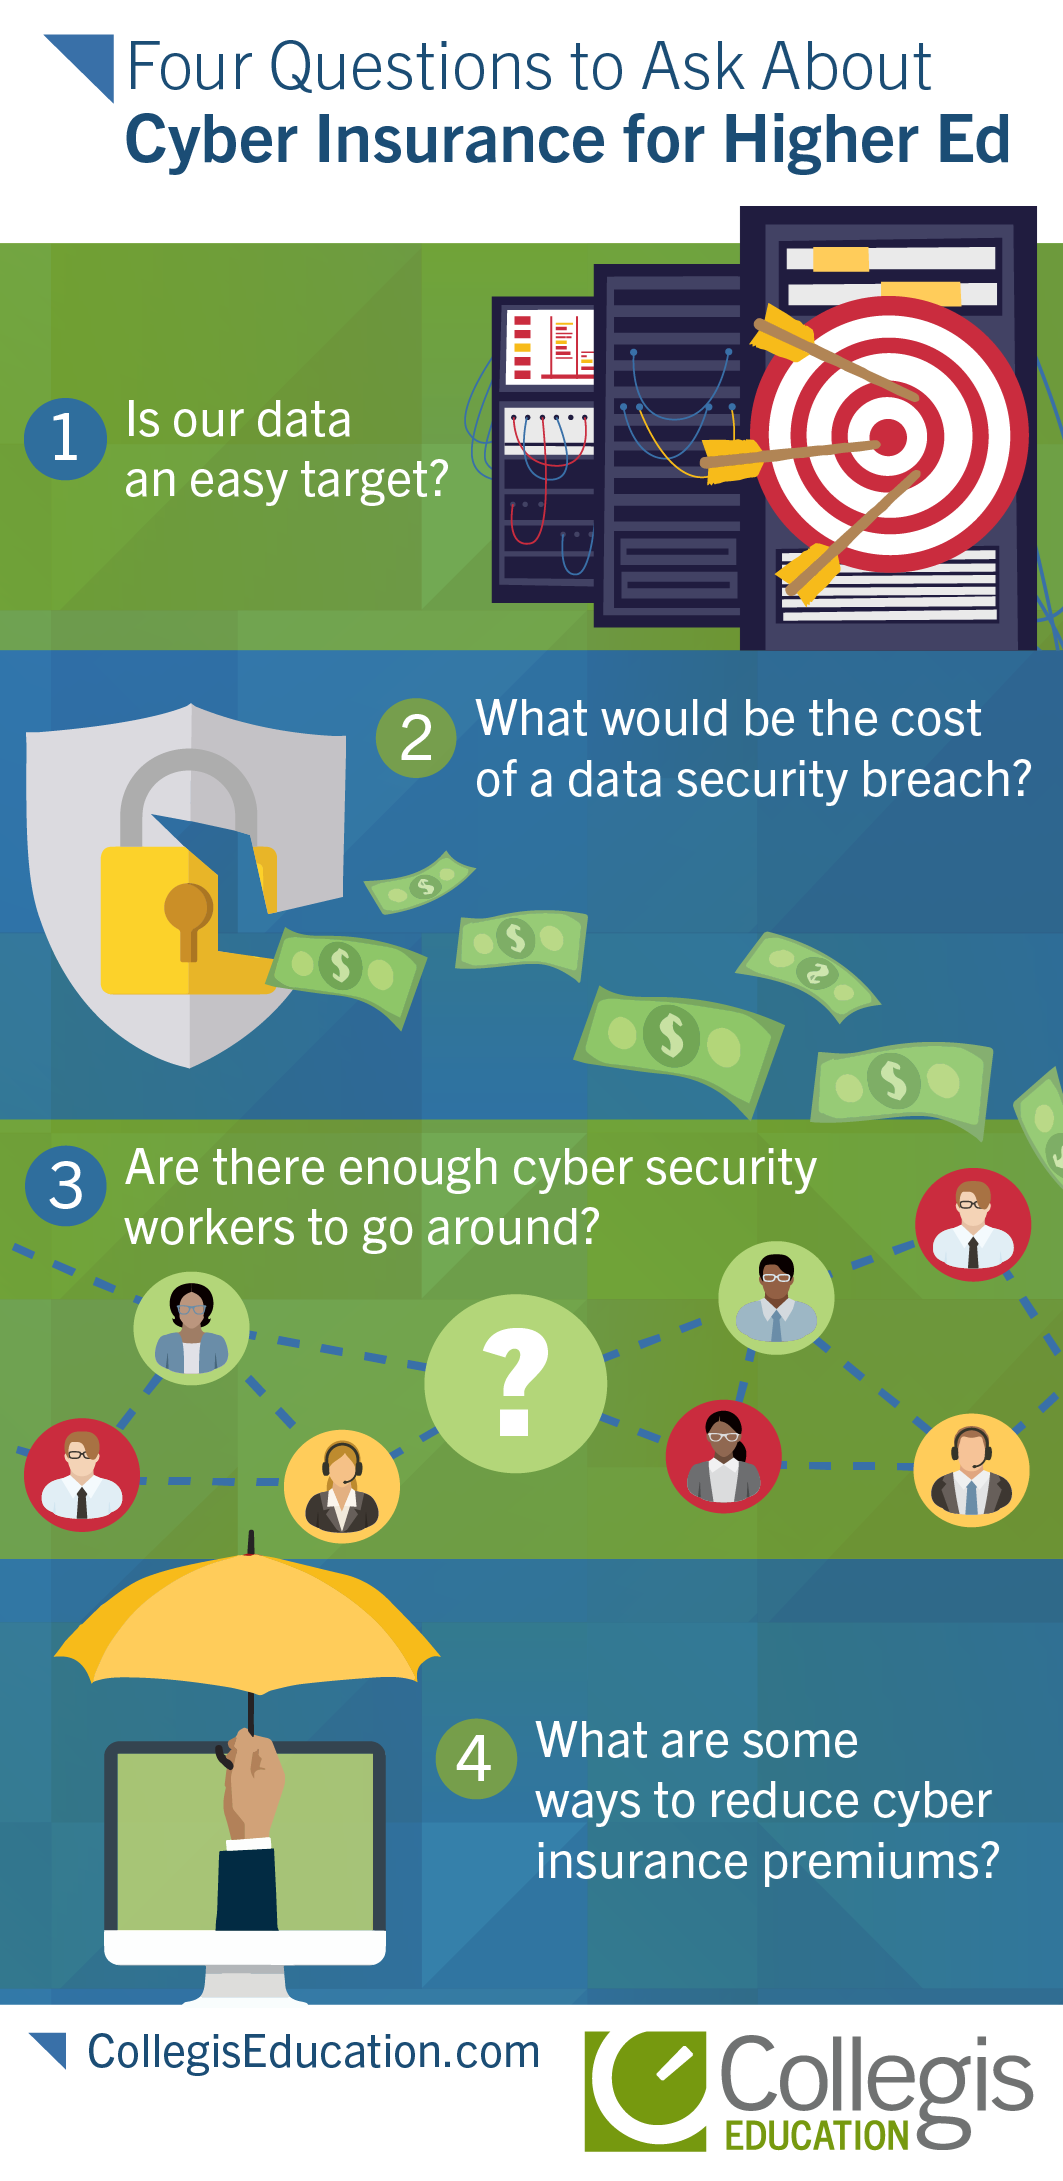 Four Questions to Ask About Cyber Insurance for Higher Ed Infographic